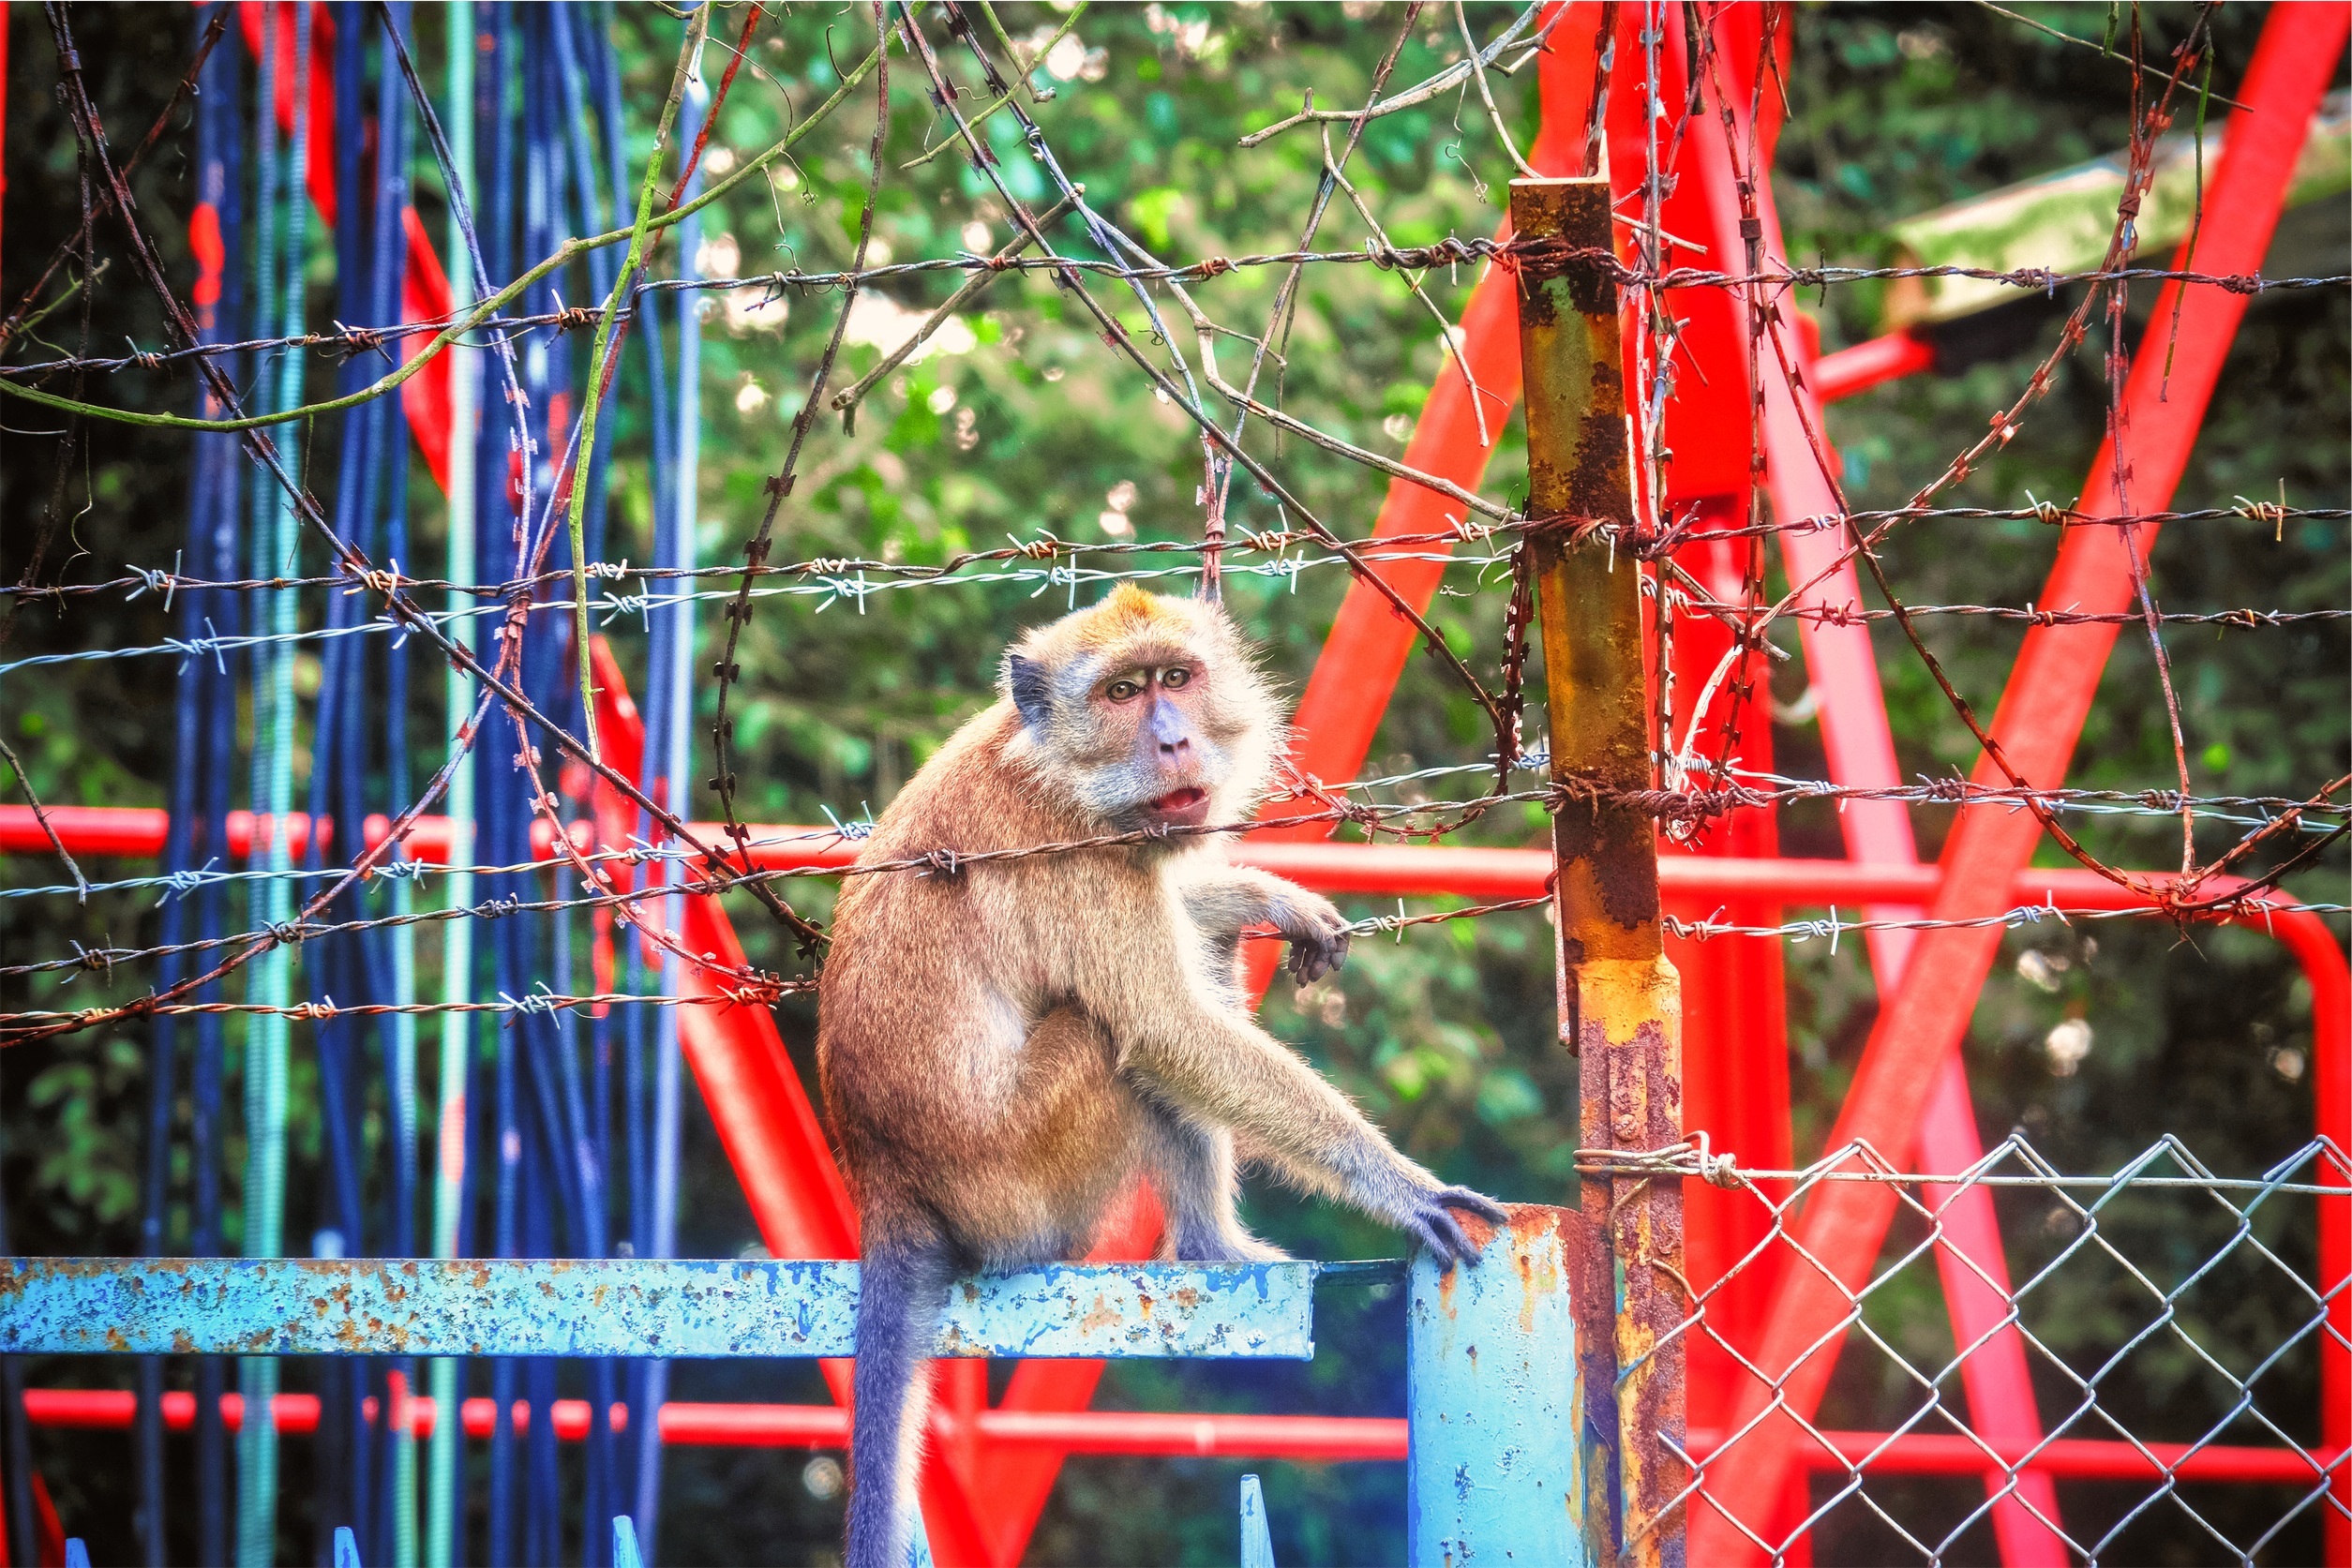 android monkey, animals, zoo, barbed wire